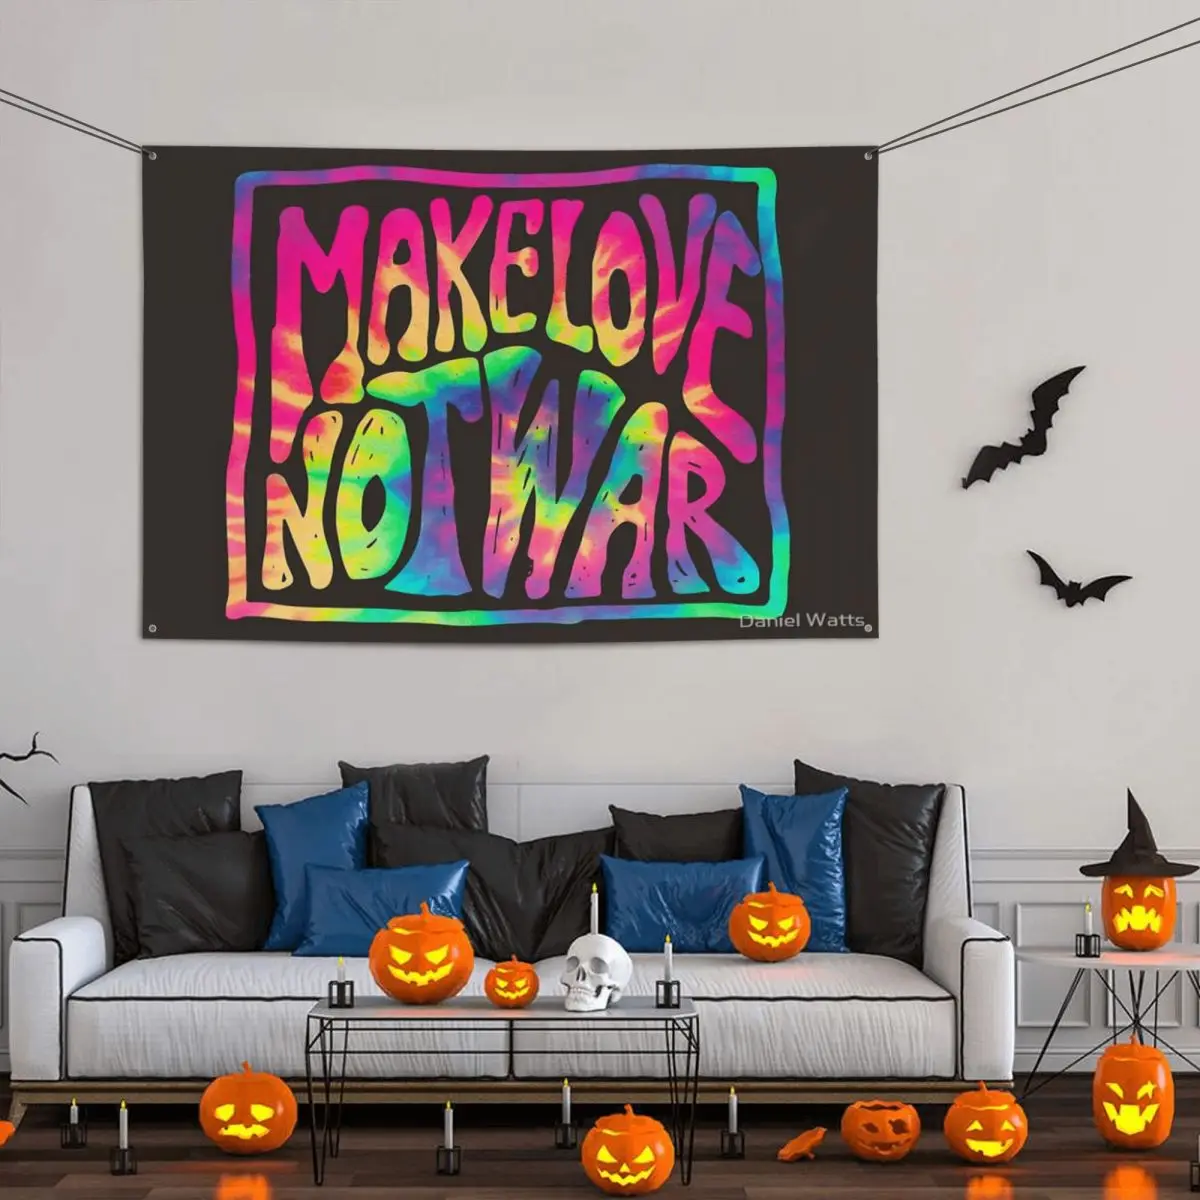 

Make Love Not War Tie Dye Party Banner Decor 120x180cm Polyester Material Easy To Hang Fade Resistant Lightweight Delicate